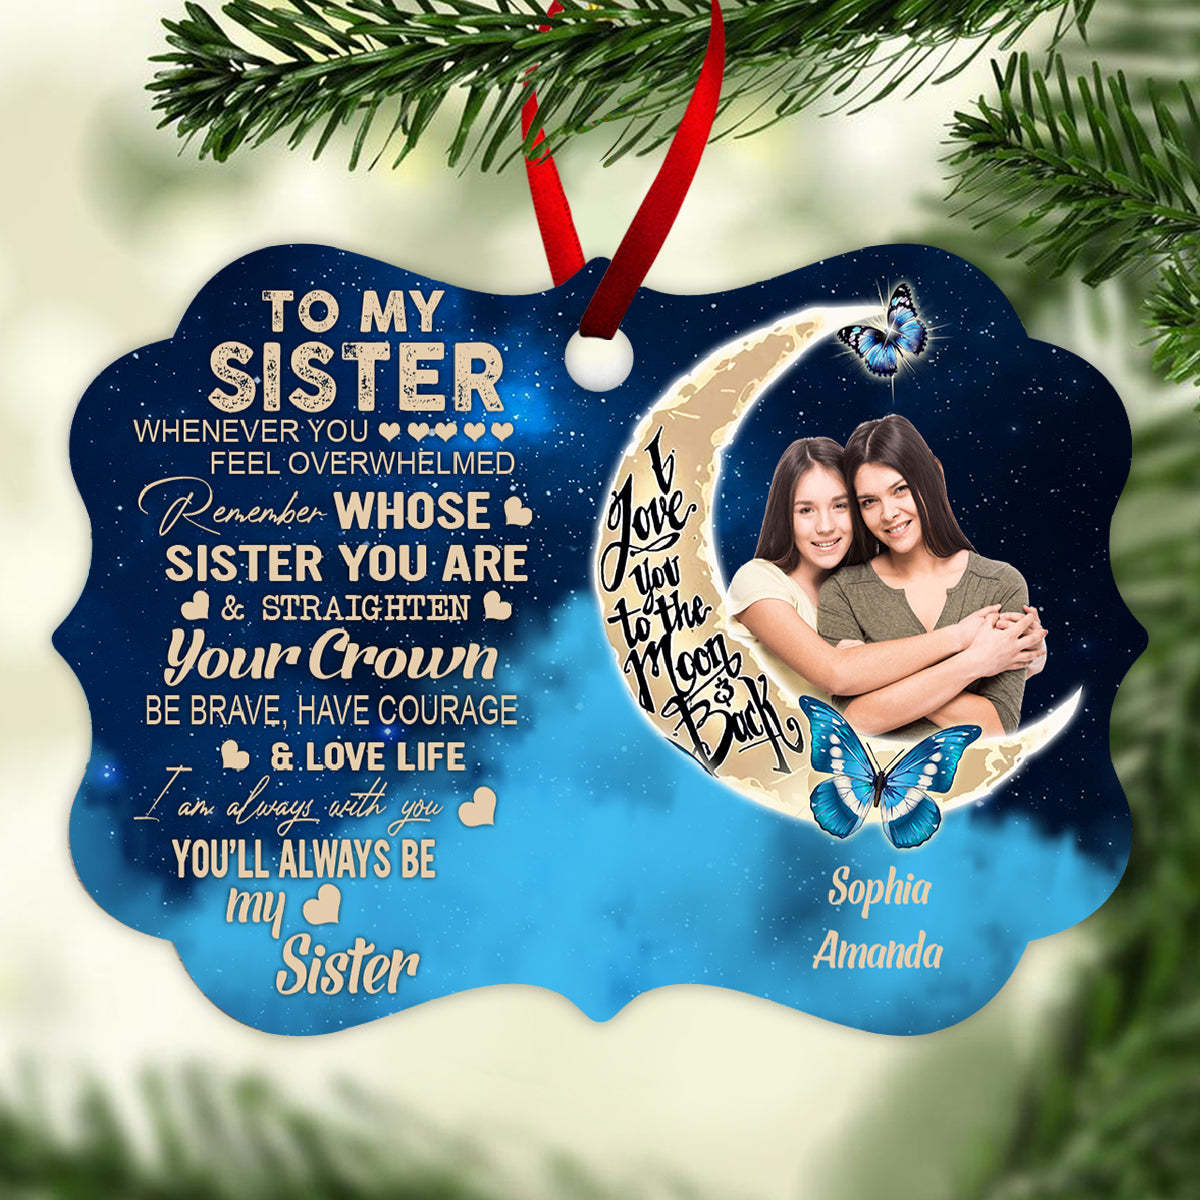 You Always Be My Sister - Personalized Ornament - Gift For Sister